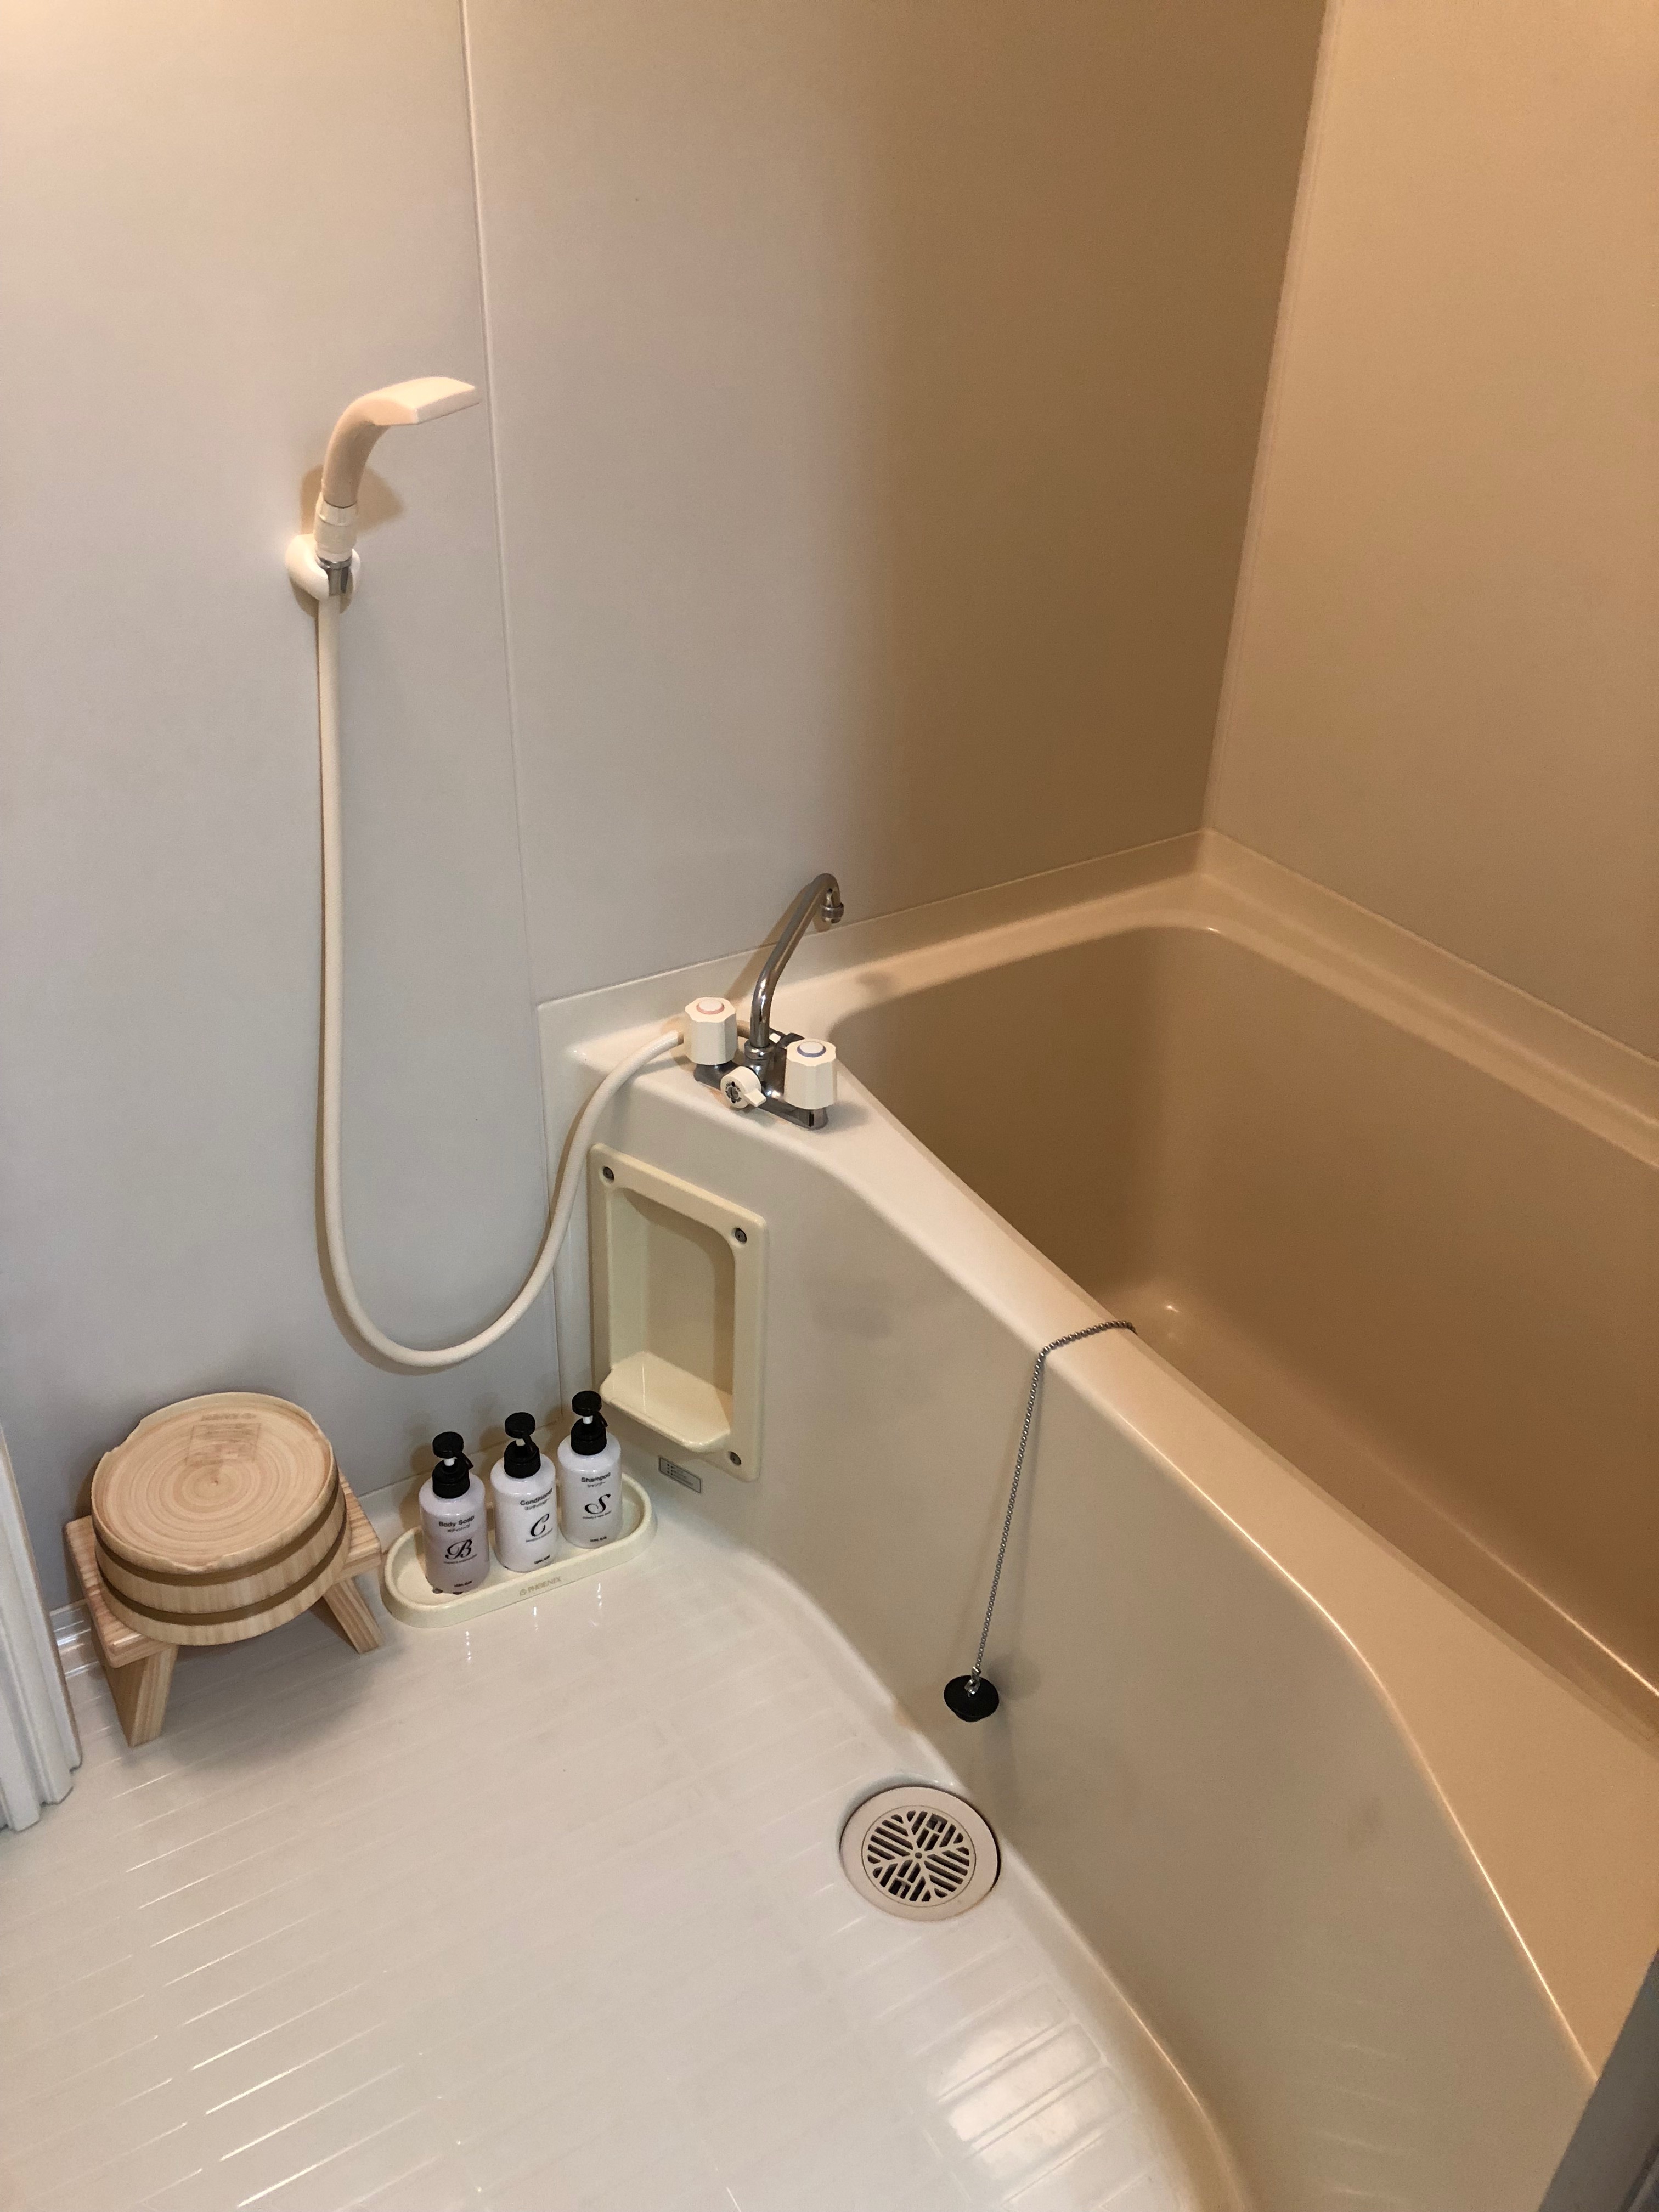 All rooms are equipped with a unit bath